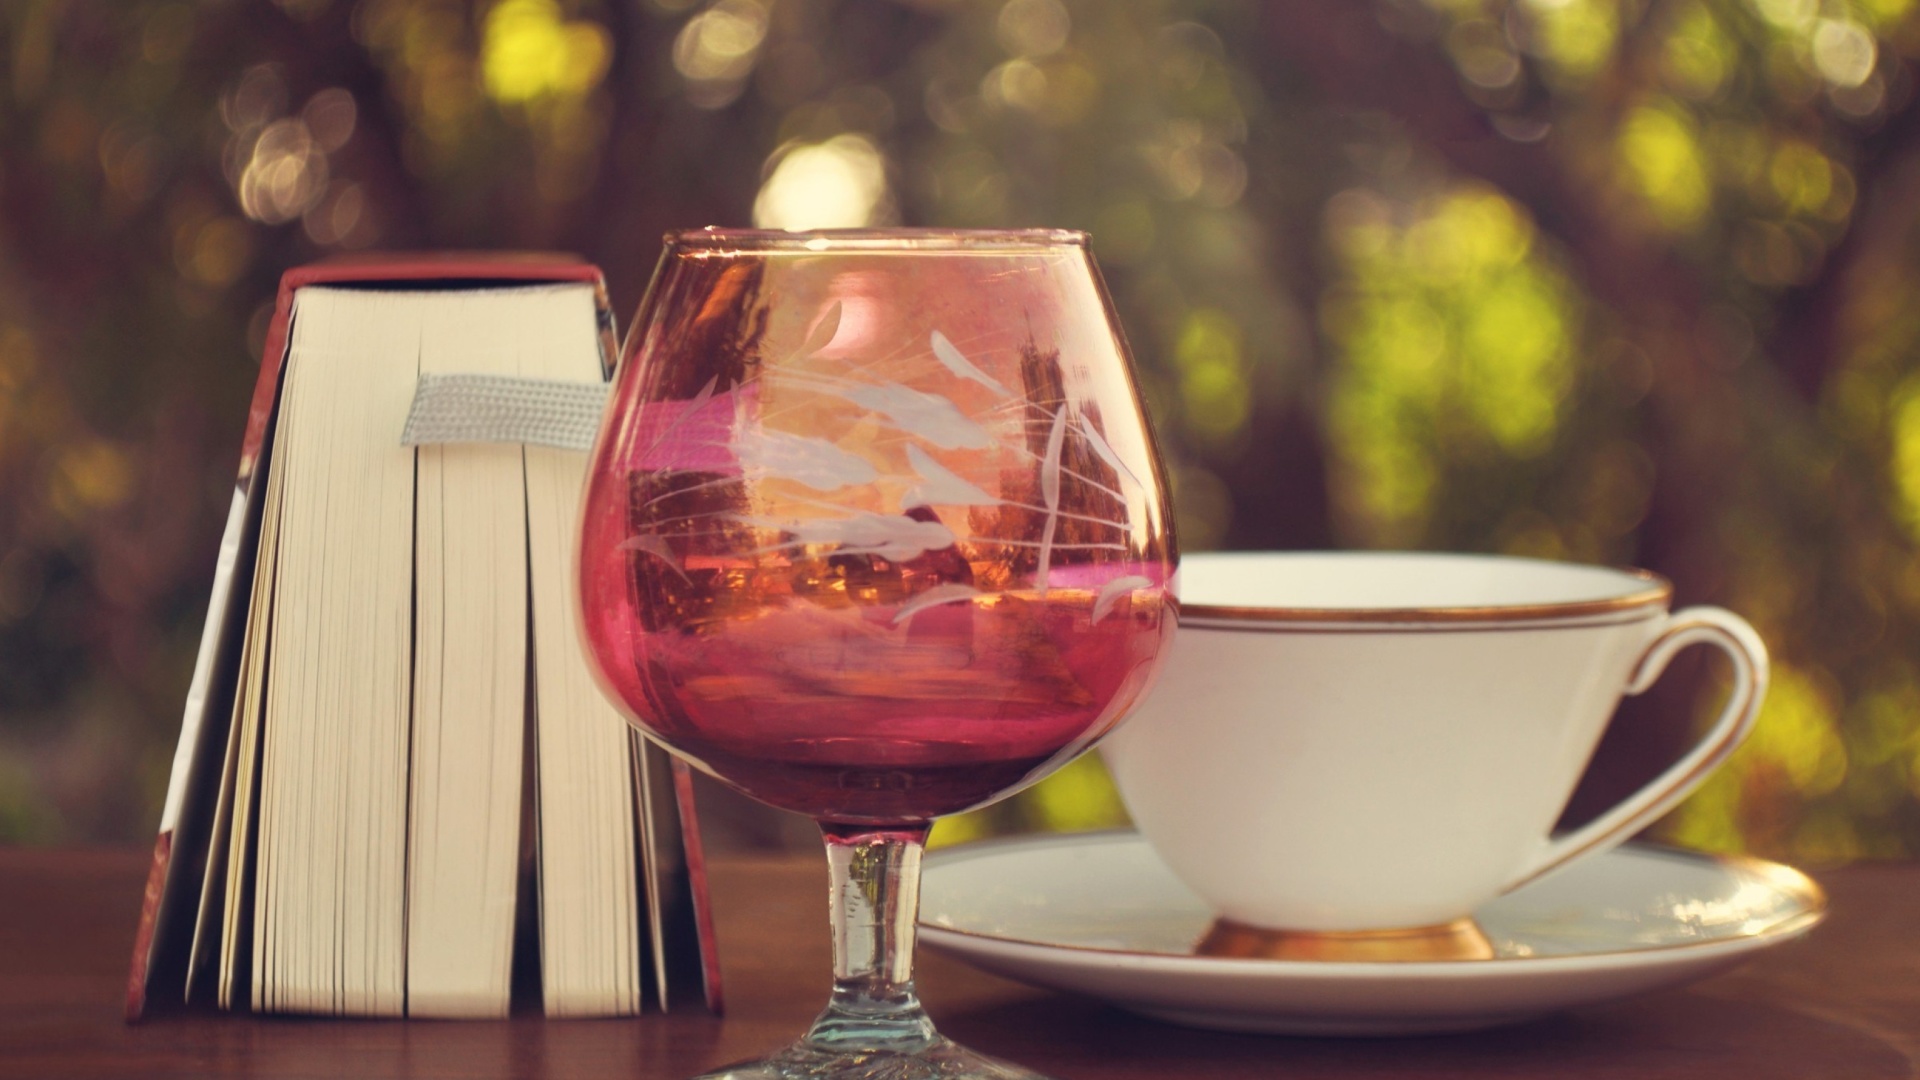 Perfect day with wine and book screenshot #1 1920x1080